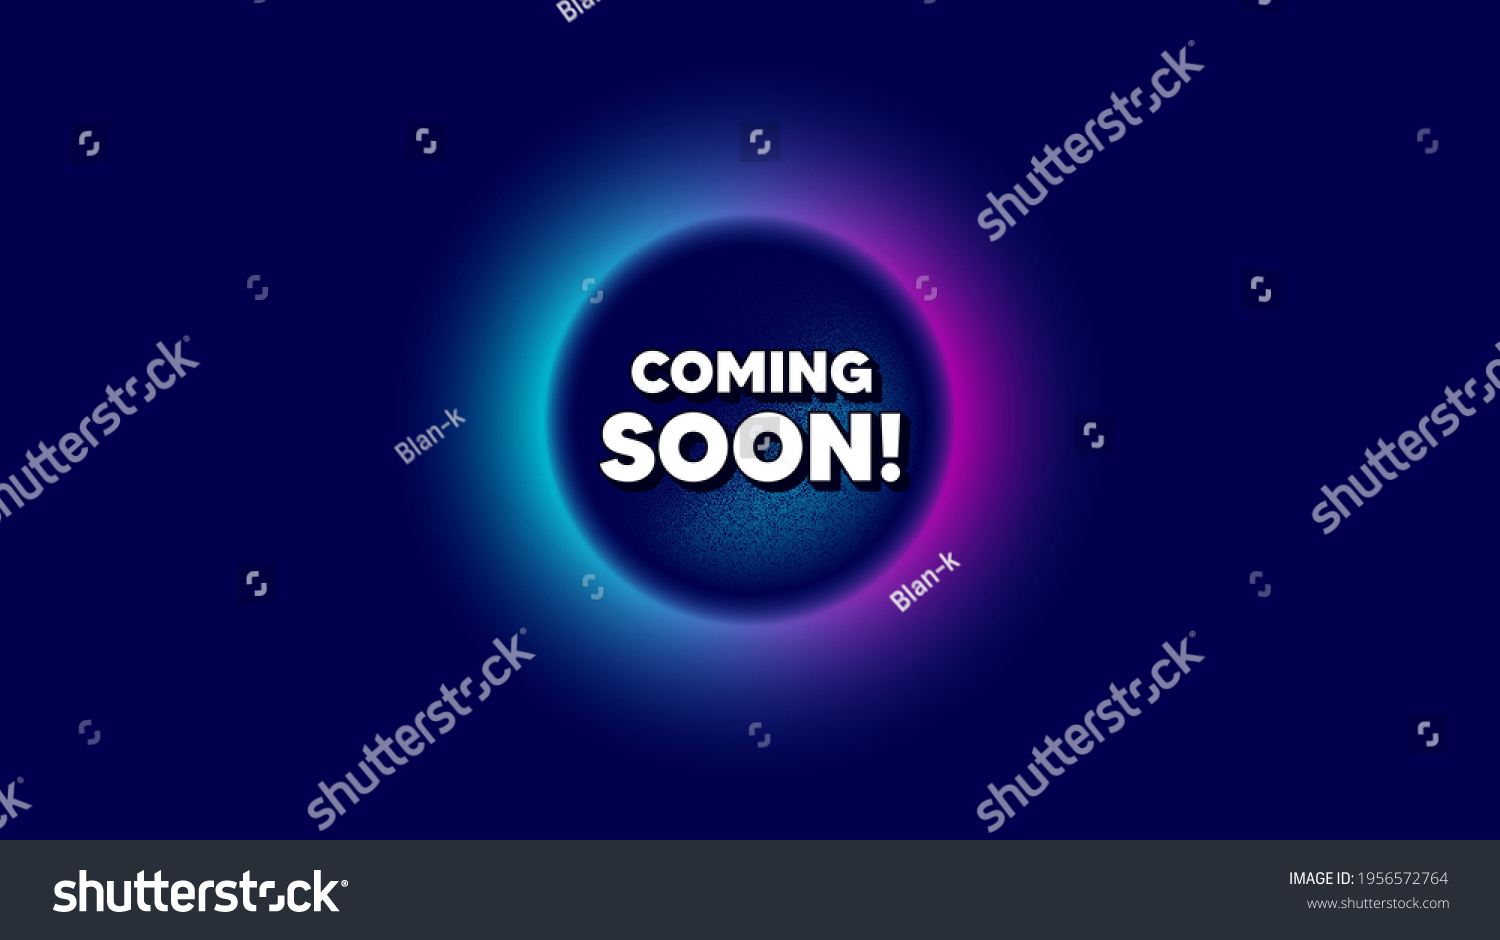 SVG of Coming soon. Abstract neon background with dotwork shape. Promotion banner sign. New product release symbol. Offer neon banner. Coming soon badge. Space background with abstract planet. Vector svg